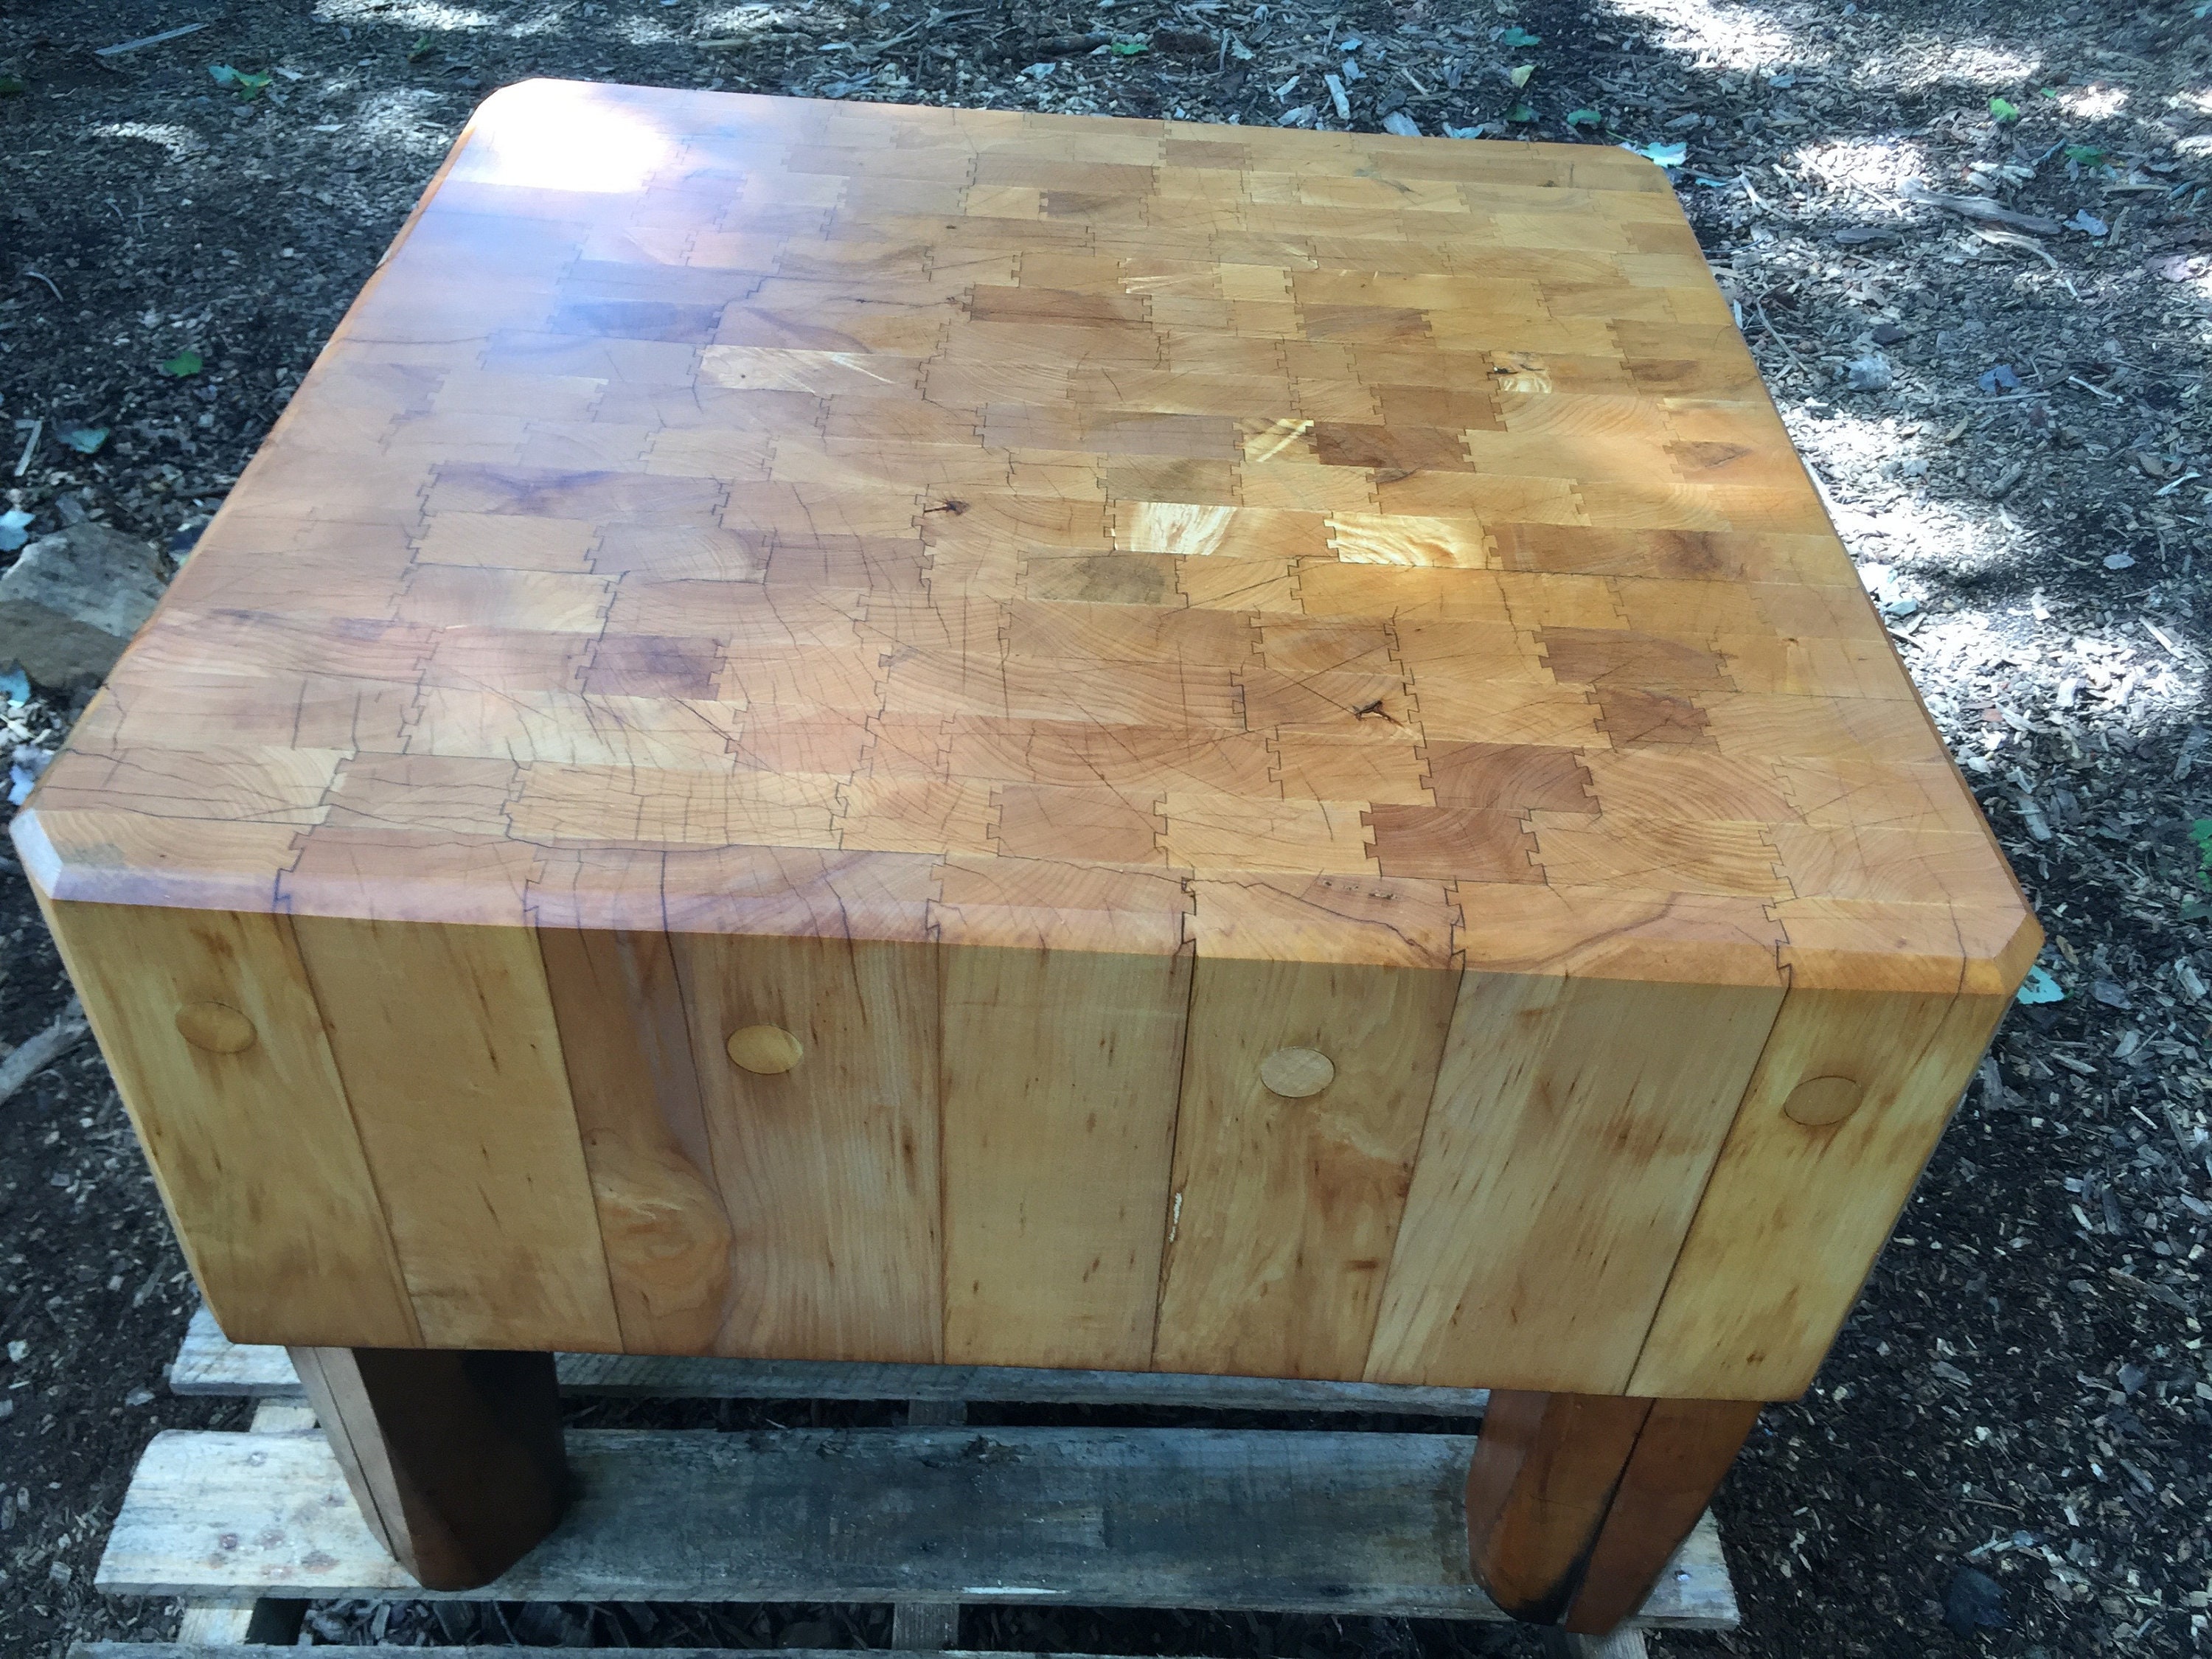 Maple End Grain Chopping Block 3” Thick - Wood Welded West